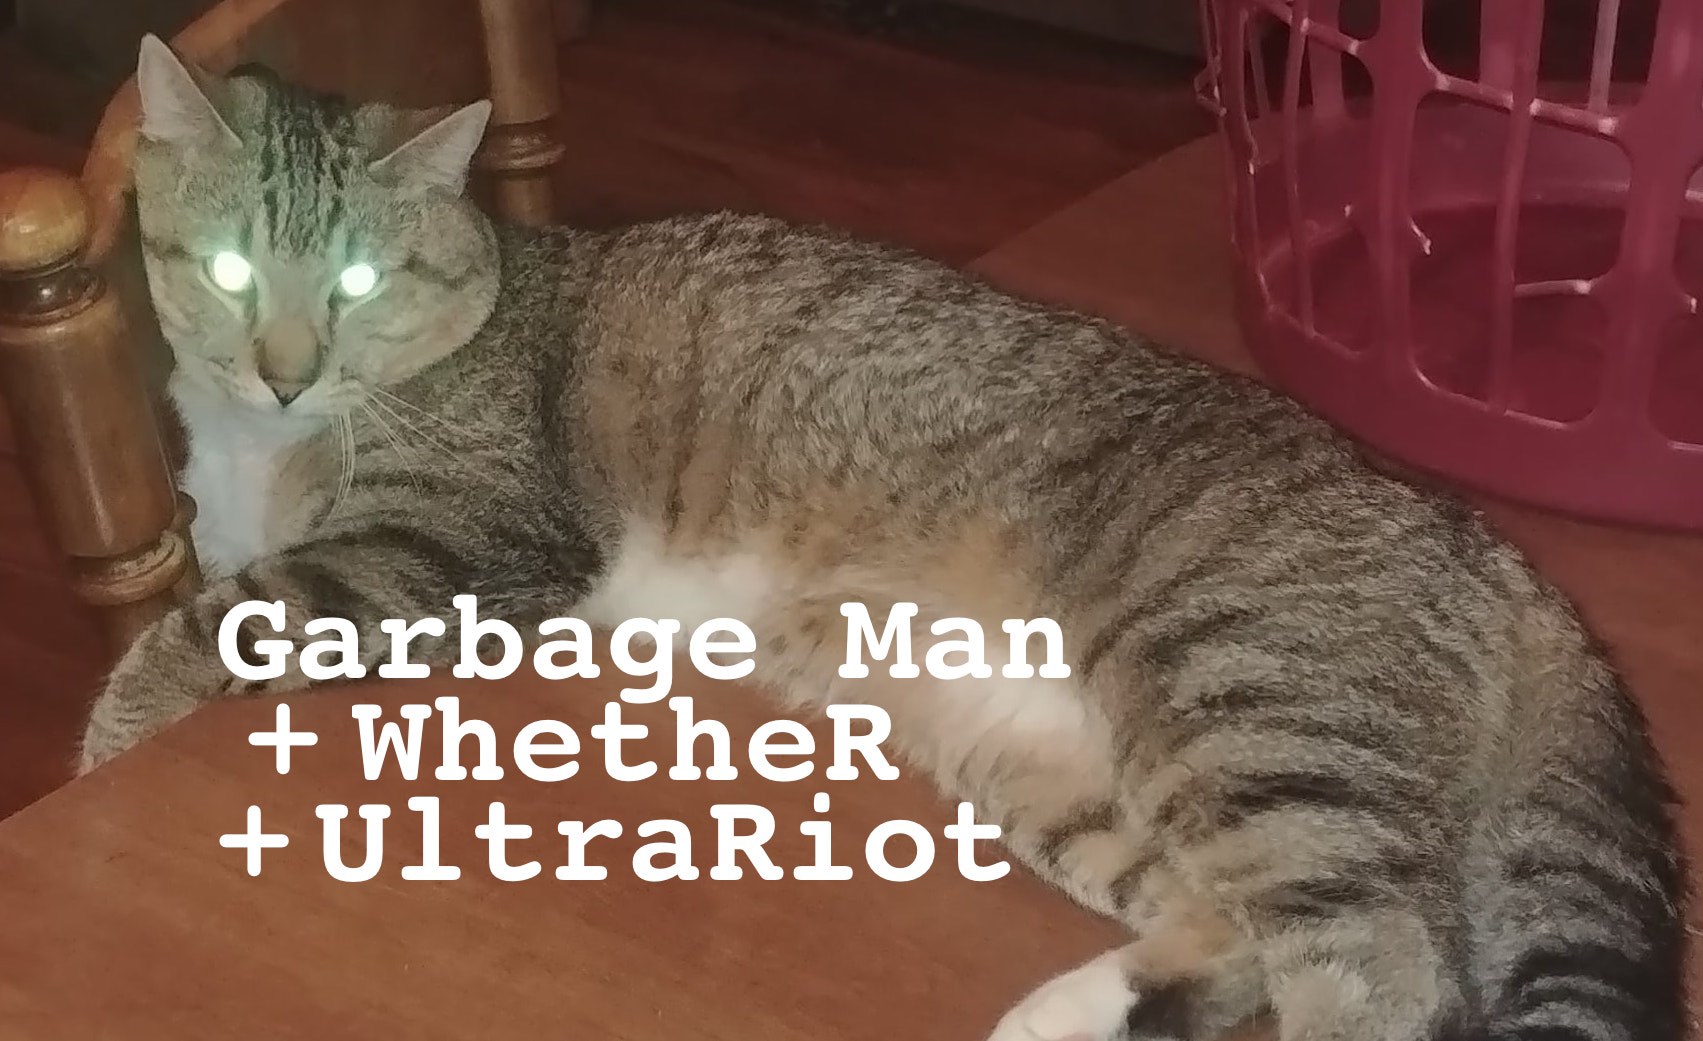 Garbage Man (WI) / WhetheR / UltraRiot flyer